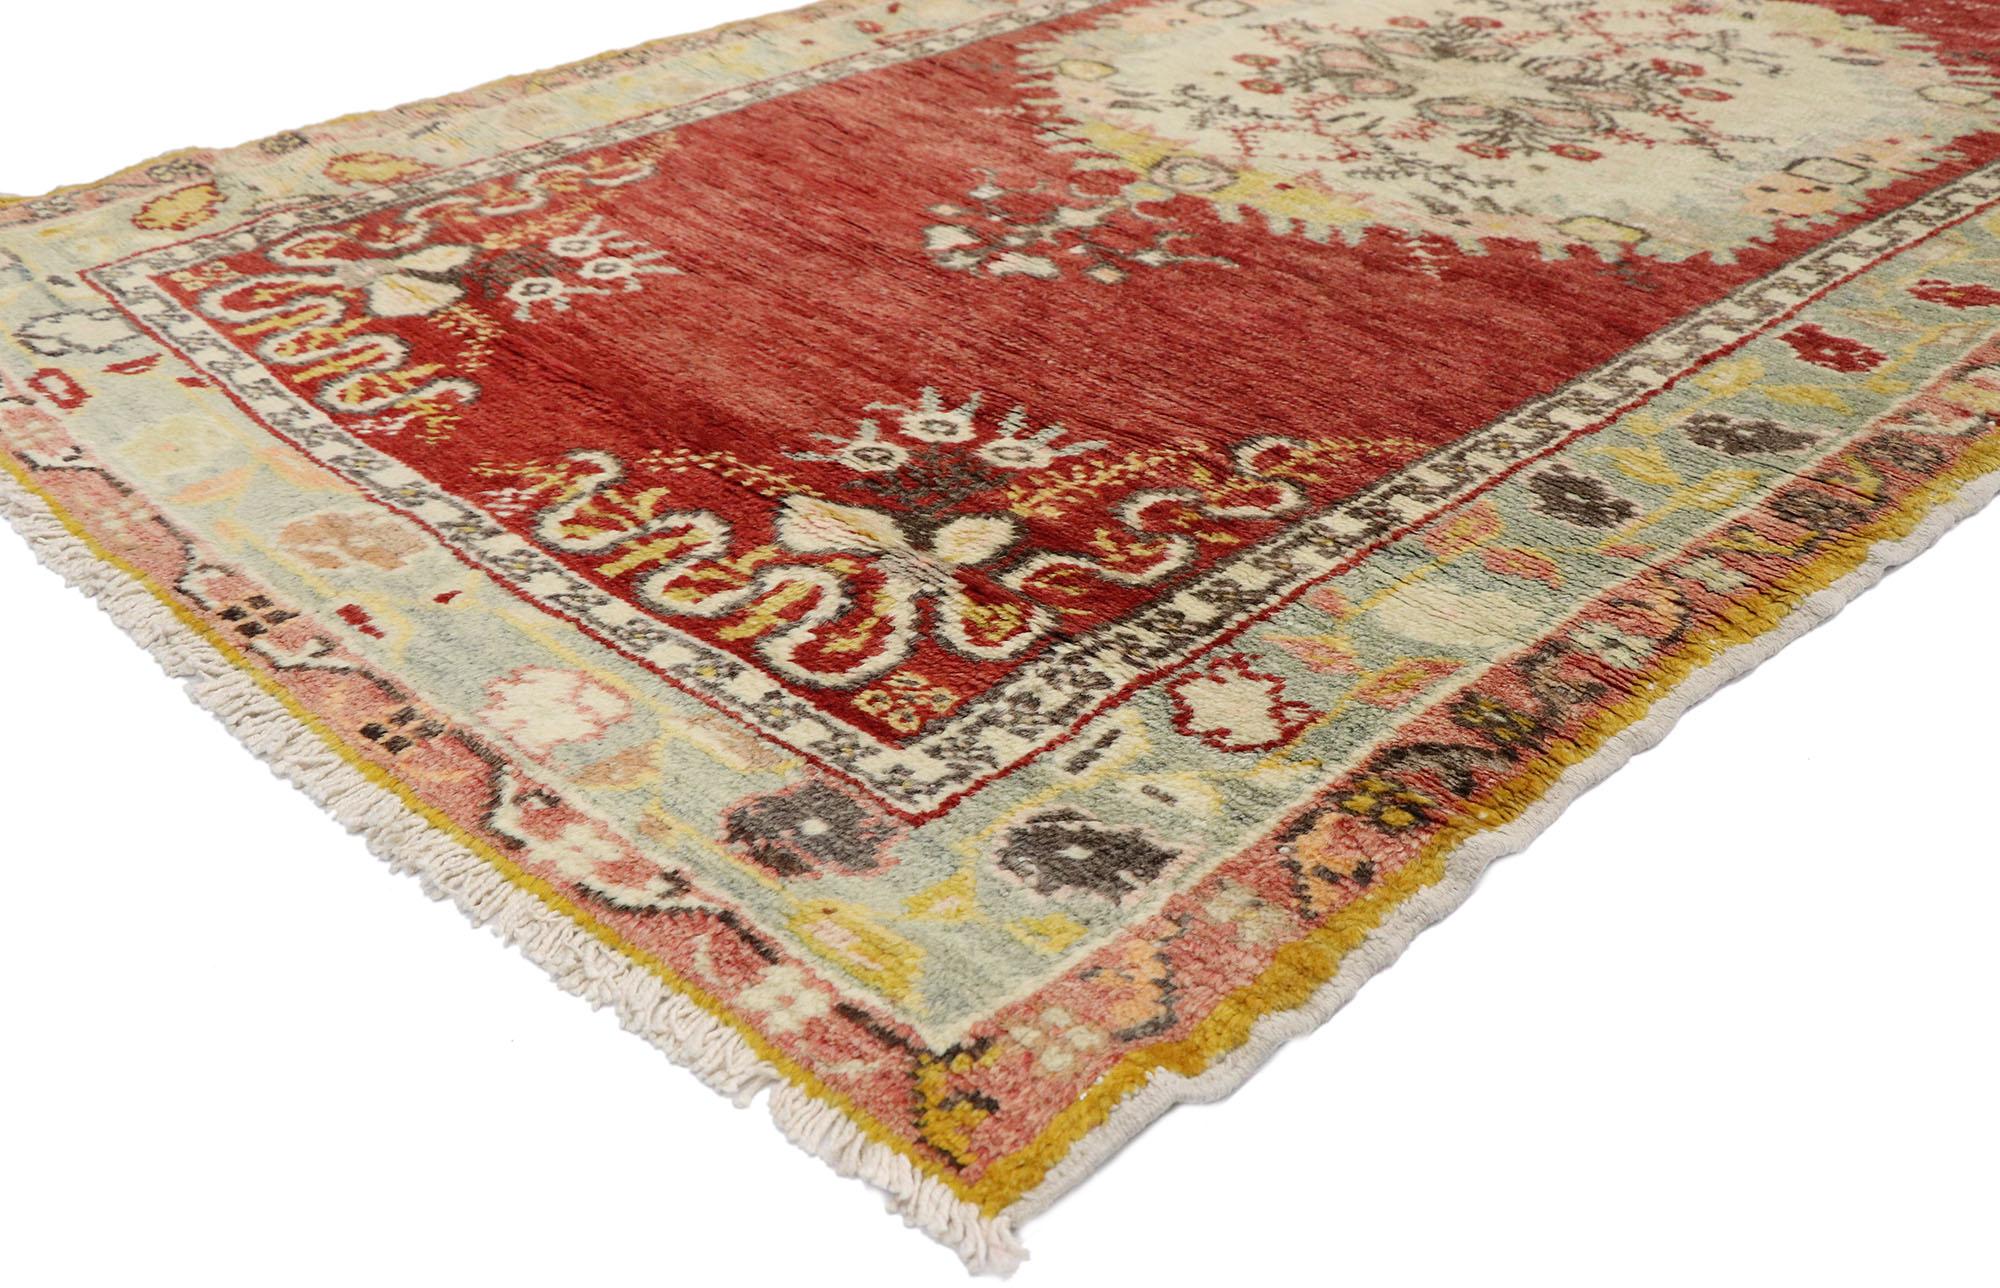 52129 Distressed vintage Turkish Oushak runner.
French Country and Romantic Rusticity meets timeless Anatolian tradition in this hand knotted wool vintage Turkish Oushak hallway rug. Set with three elaborate round-oval medallions against an